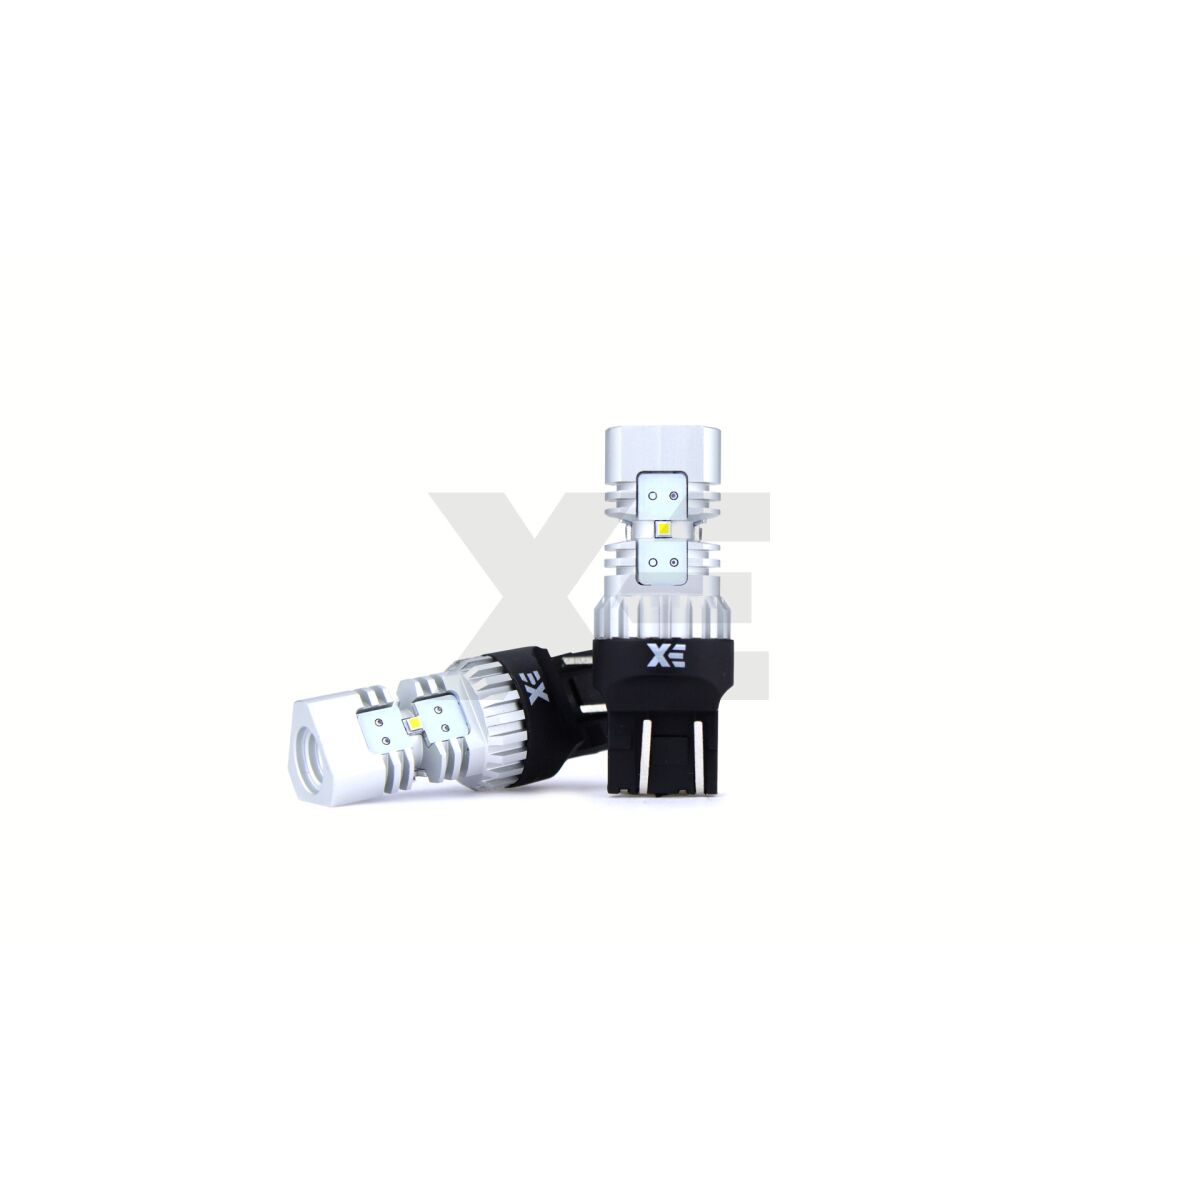 COPPIA LUCI DIURNE DRL 15 LED T20 W21W 7440 CANBUS 6000K 100% NO